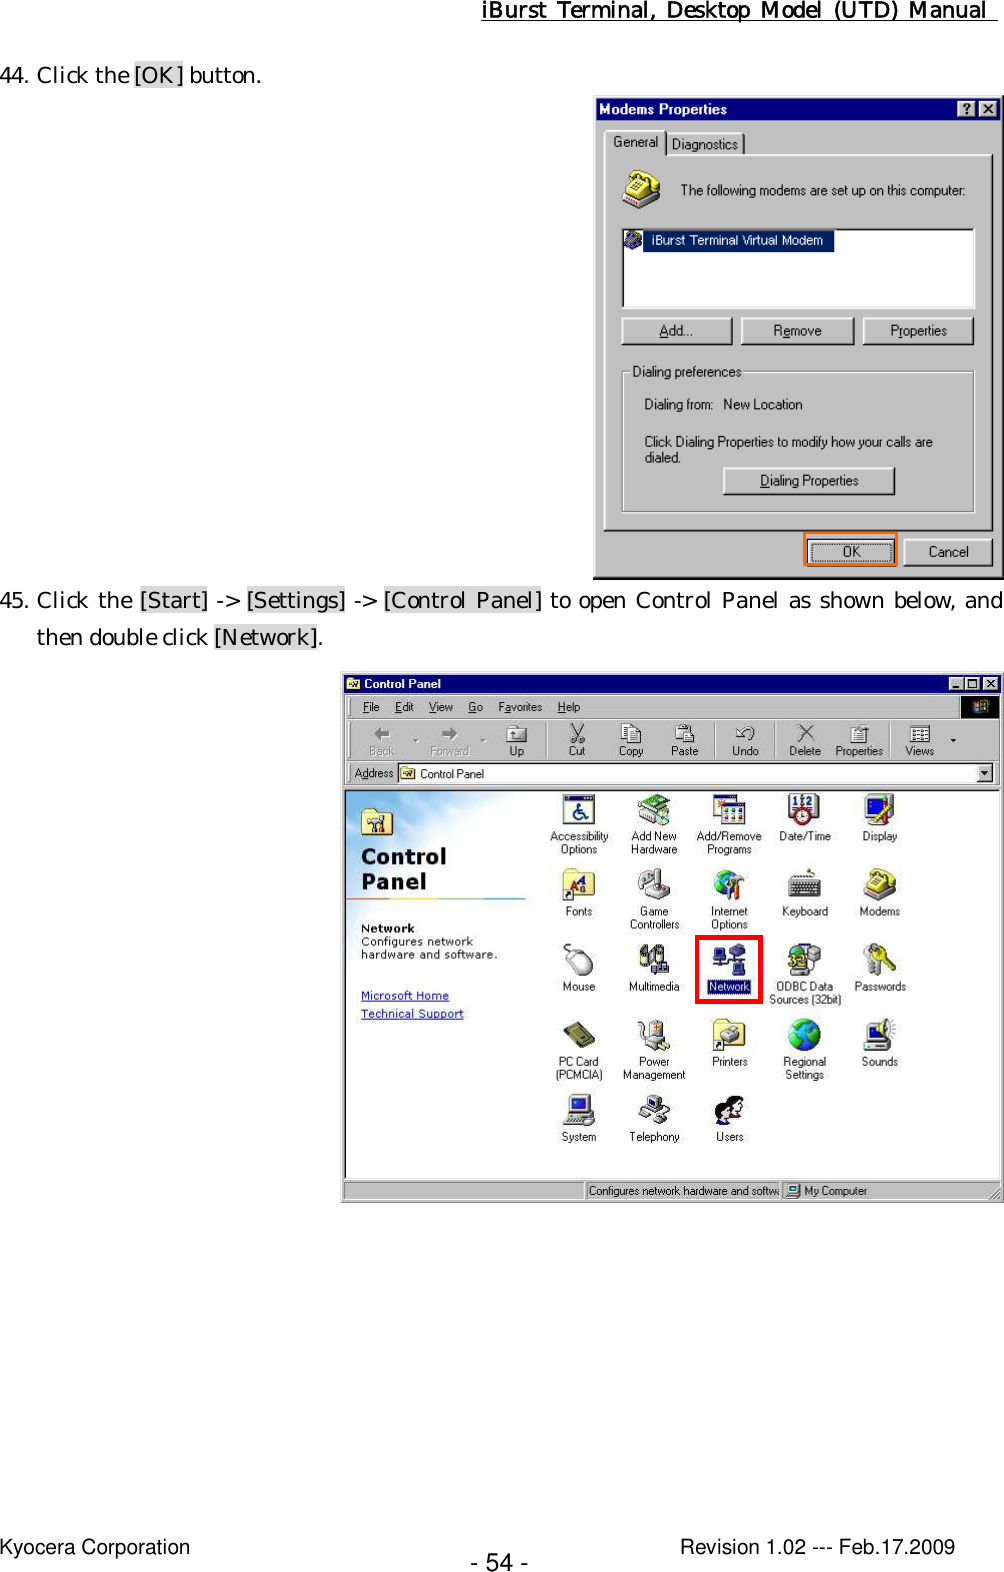 iBurst  Terminal, Desktop  Model  (UTD)  Manual    Kyocera Corporation                                                                                              Revision 1.02 --- Feb.17.2009 - 54 - 44. Click the [OK] button.   45. Click the [Start] -&gt; [Settings] -&gt; [Control Panel] to open Control Panel as shown below, and then double click [Network].   